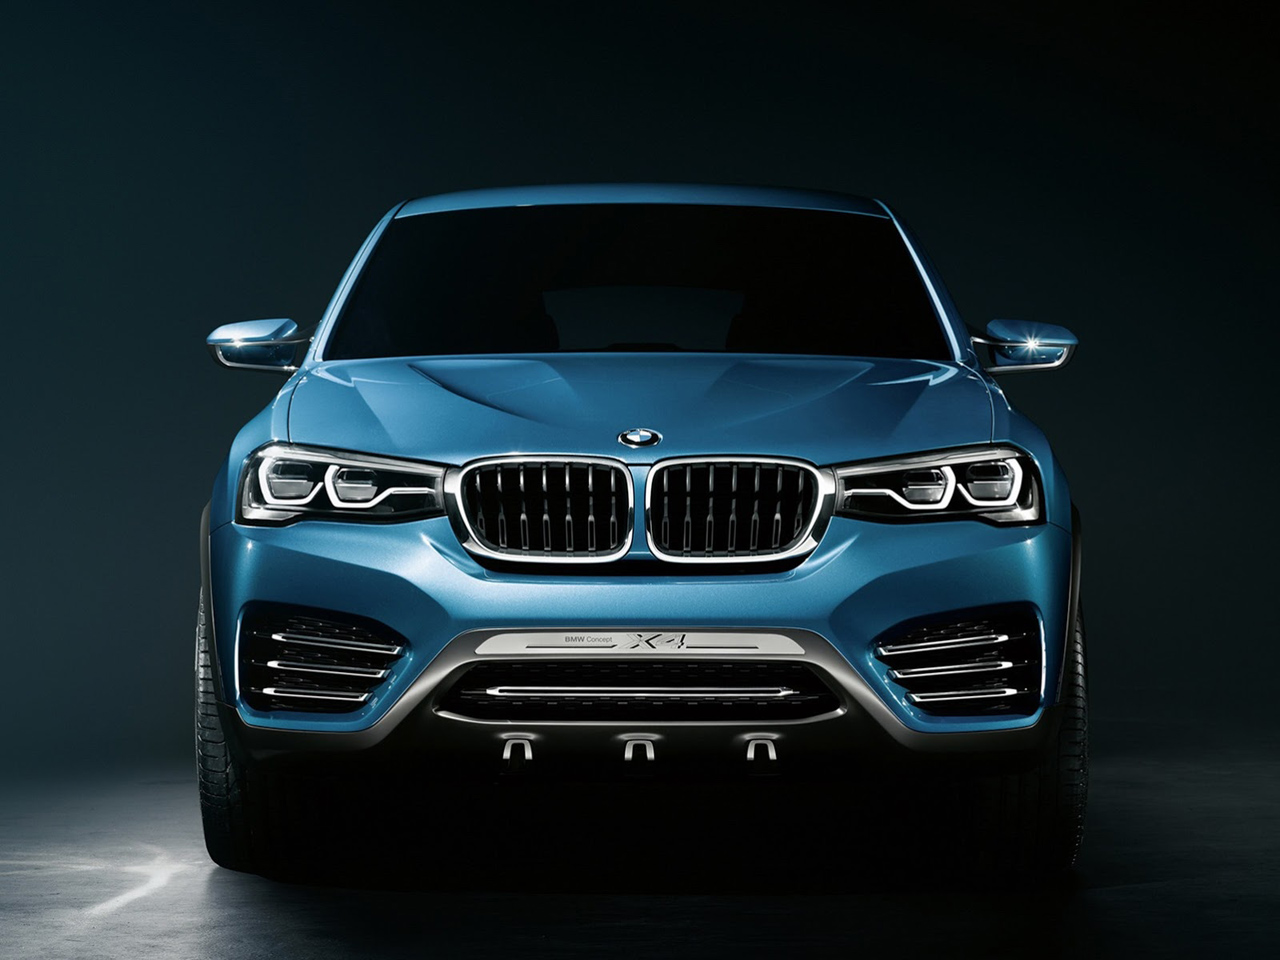 004-bmw-x4-concept-leaked-images